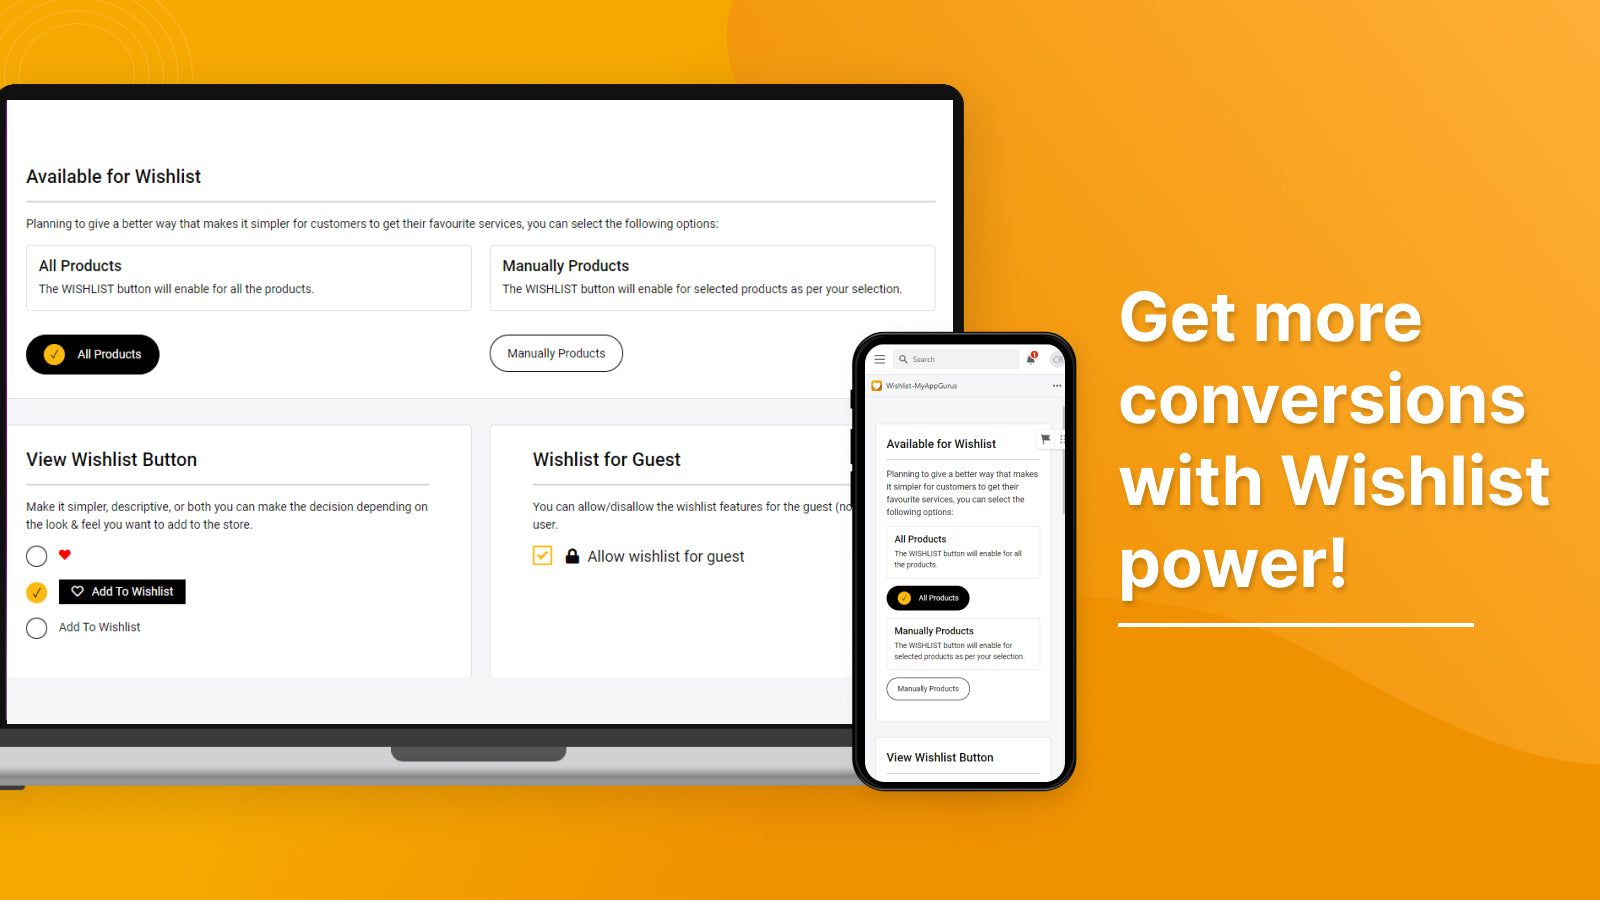 Get more conversions with Wishlist power!